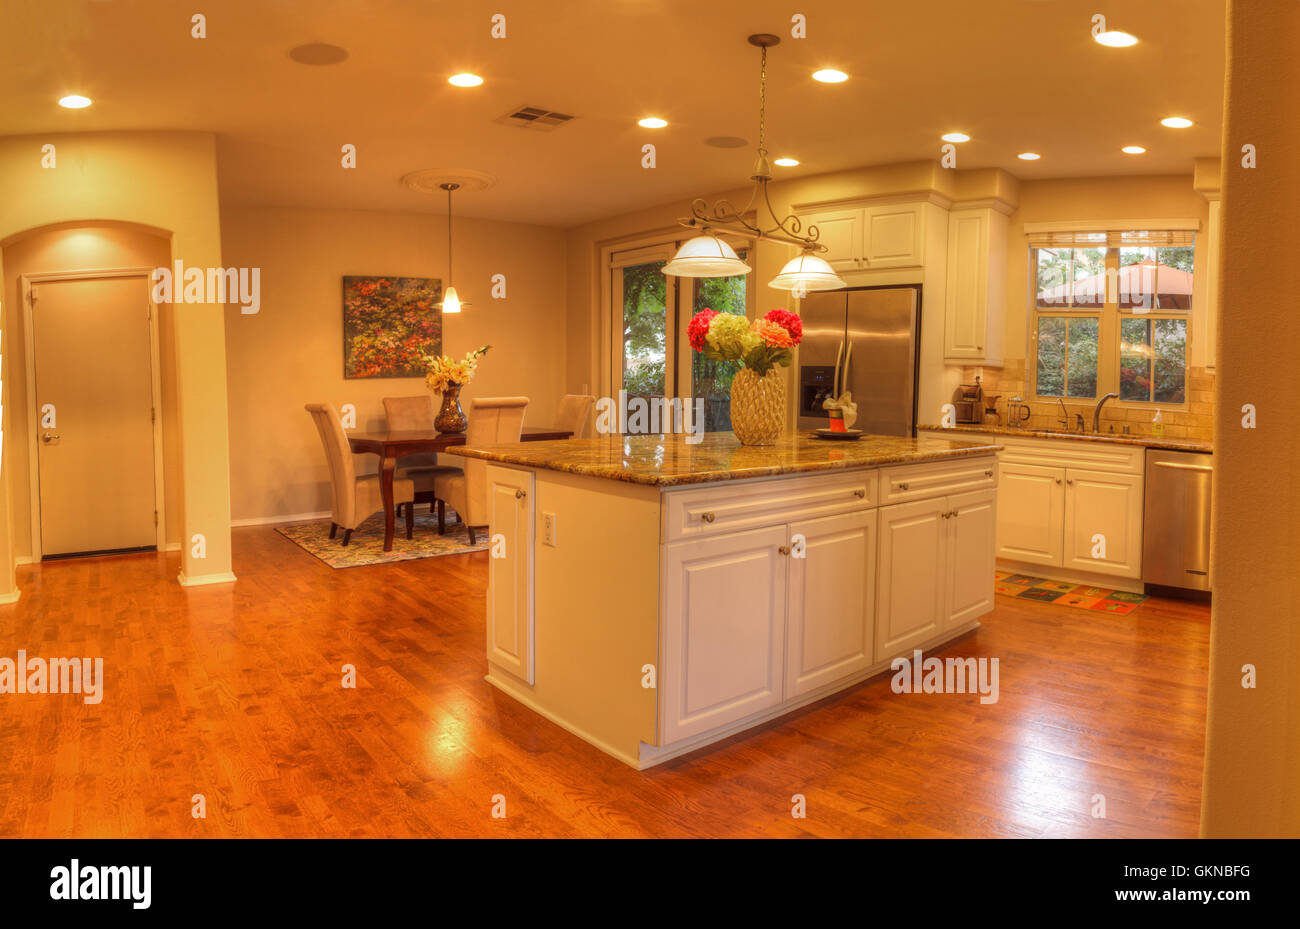 Irvine, CA, USA – August 19, 2016: Large kitchen with recessed lighting, wood floors, chrome stove, marble counter and feng shui Stock Photo